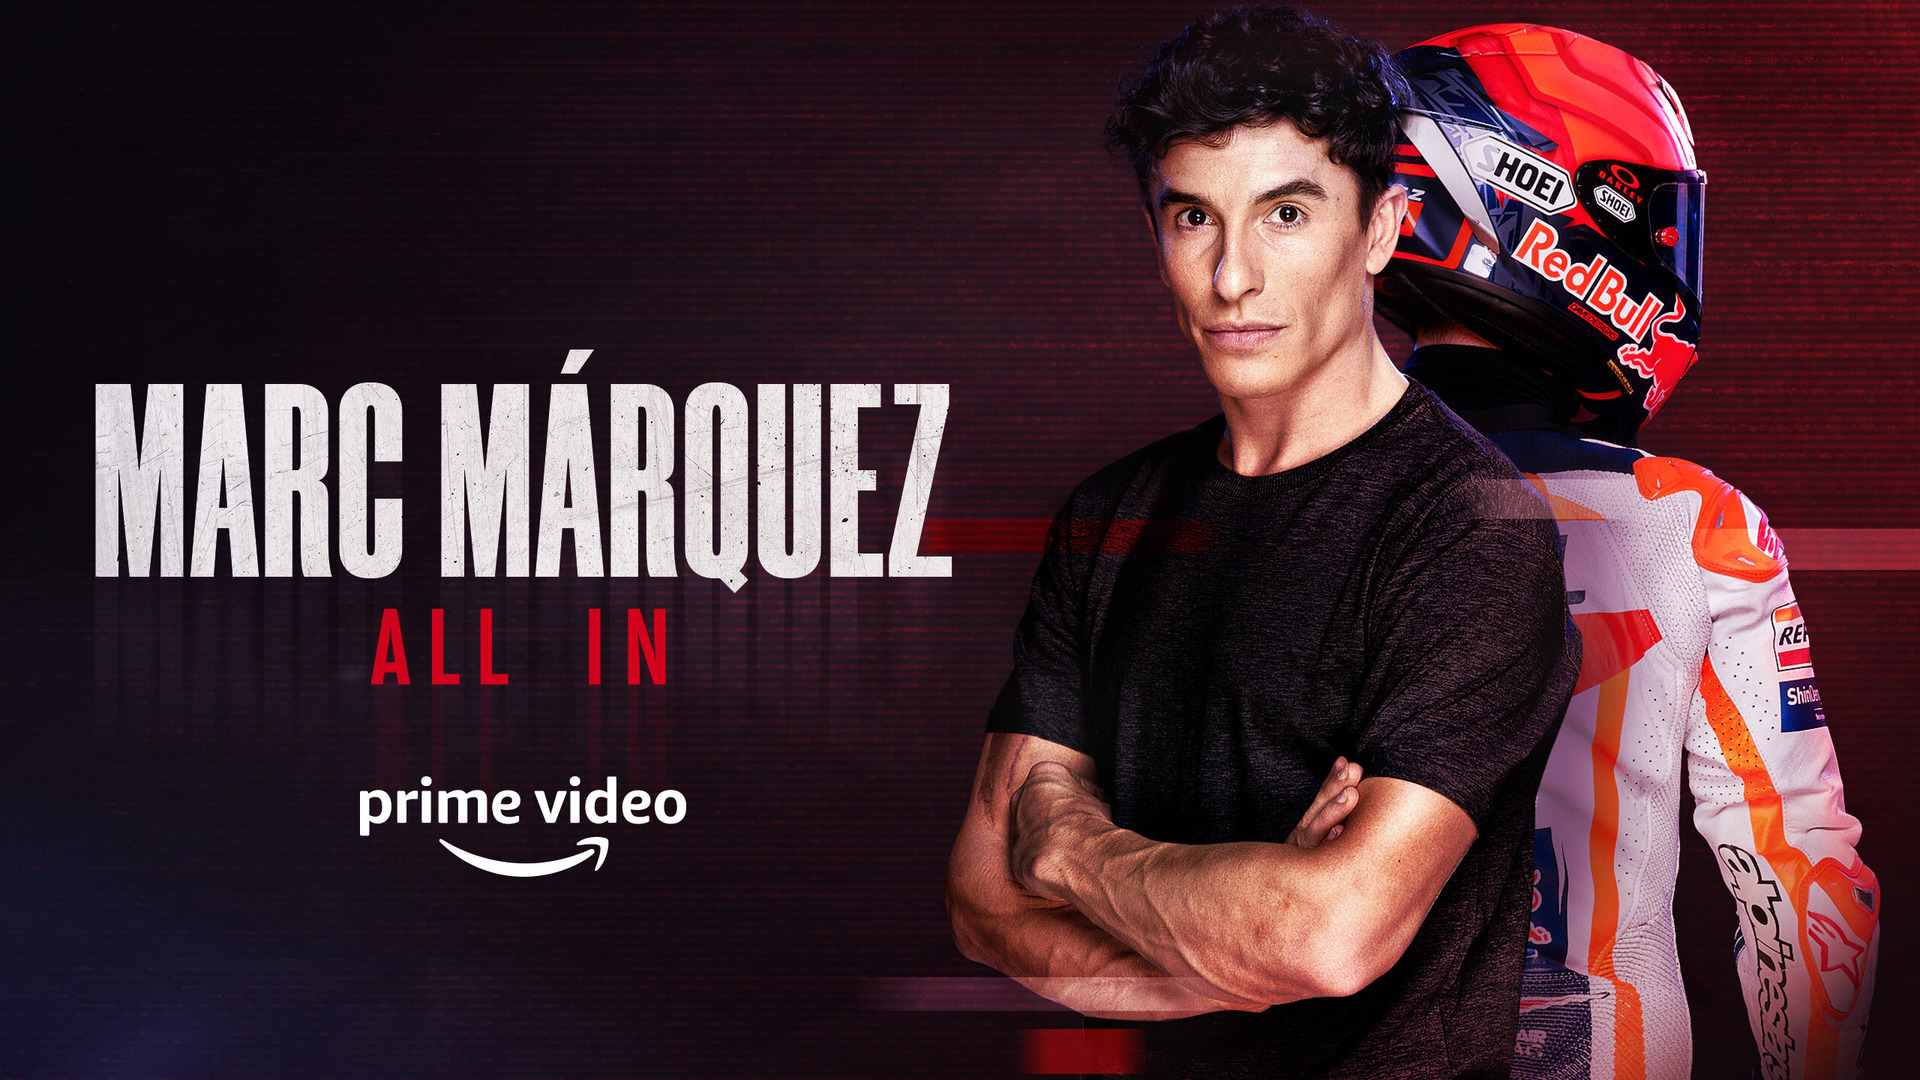 Show Marc Márquez. All In